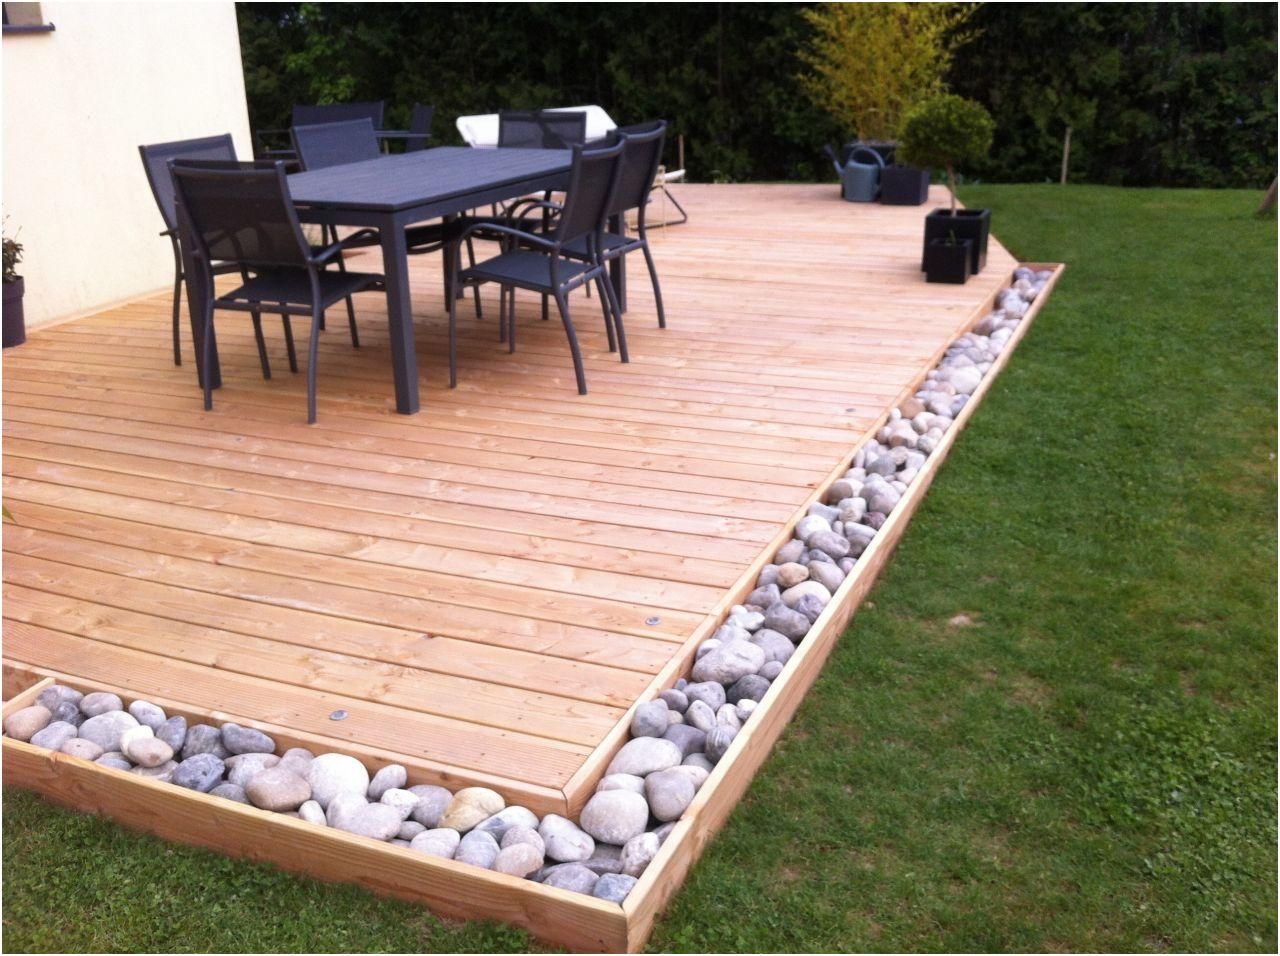 15+ Small & Large Deck Ideas That Will Make Your Backyard Beautiful - Interior Remodel